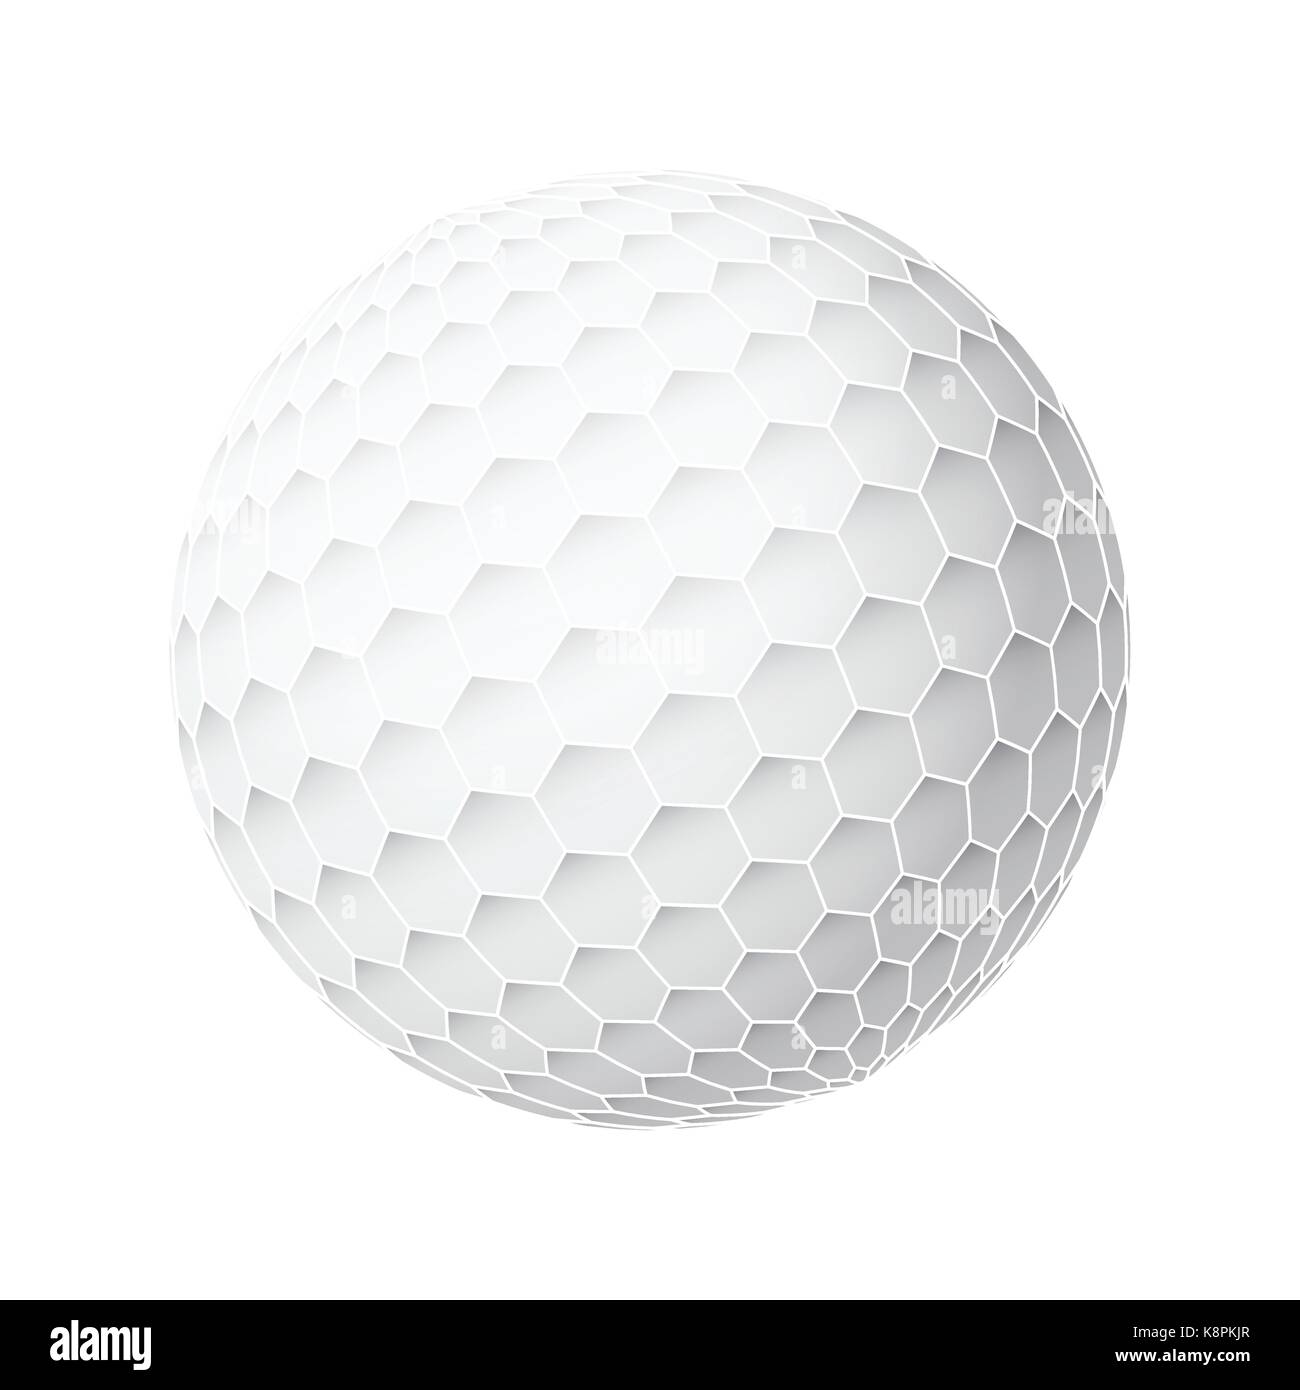 Golfball realistic vector. Image of single golf equipment, ball illustration isolated on white background. Stock Vector